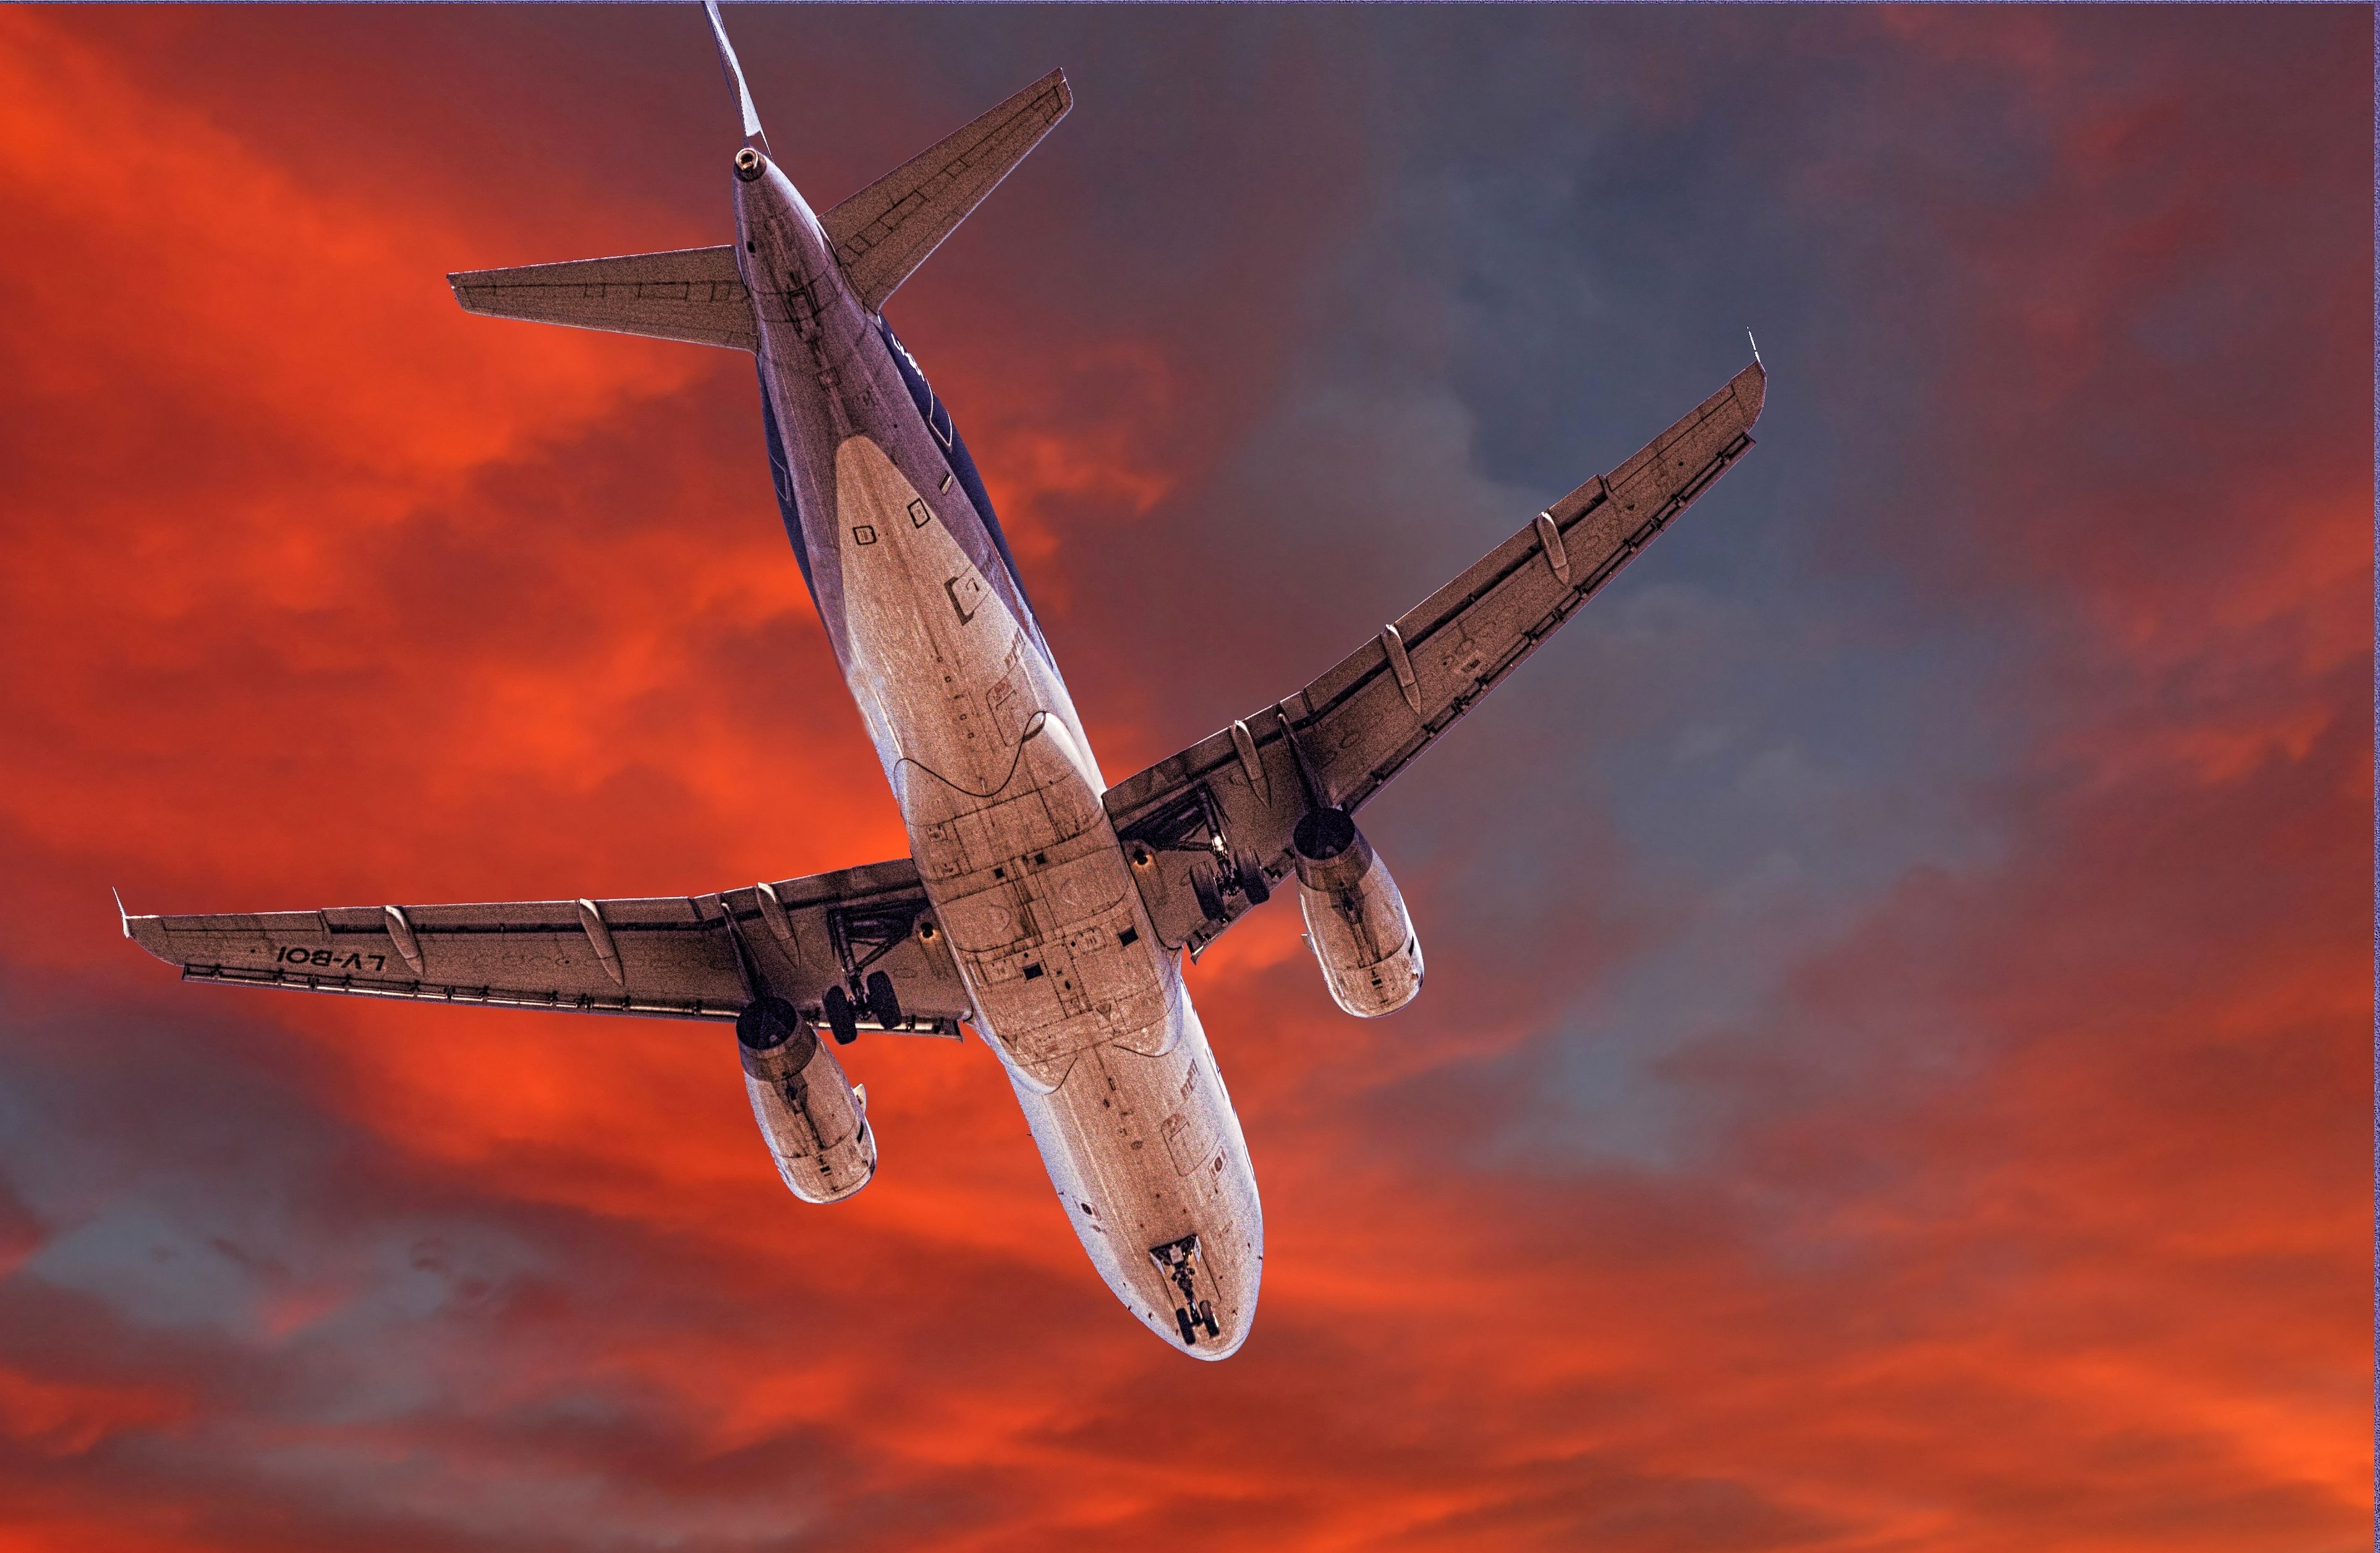 Airbus A320 Wallpapers